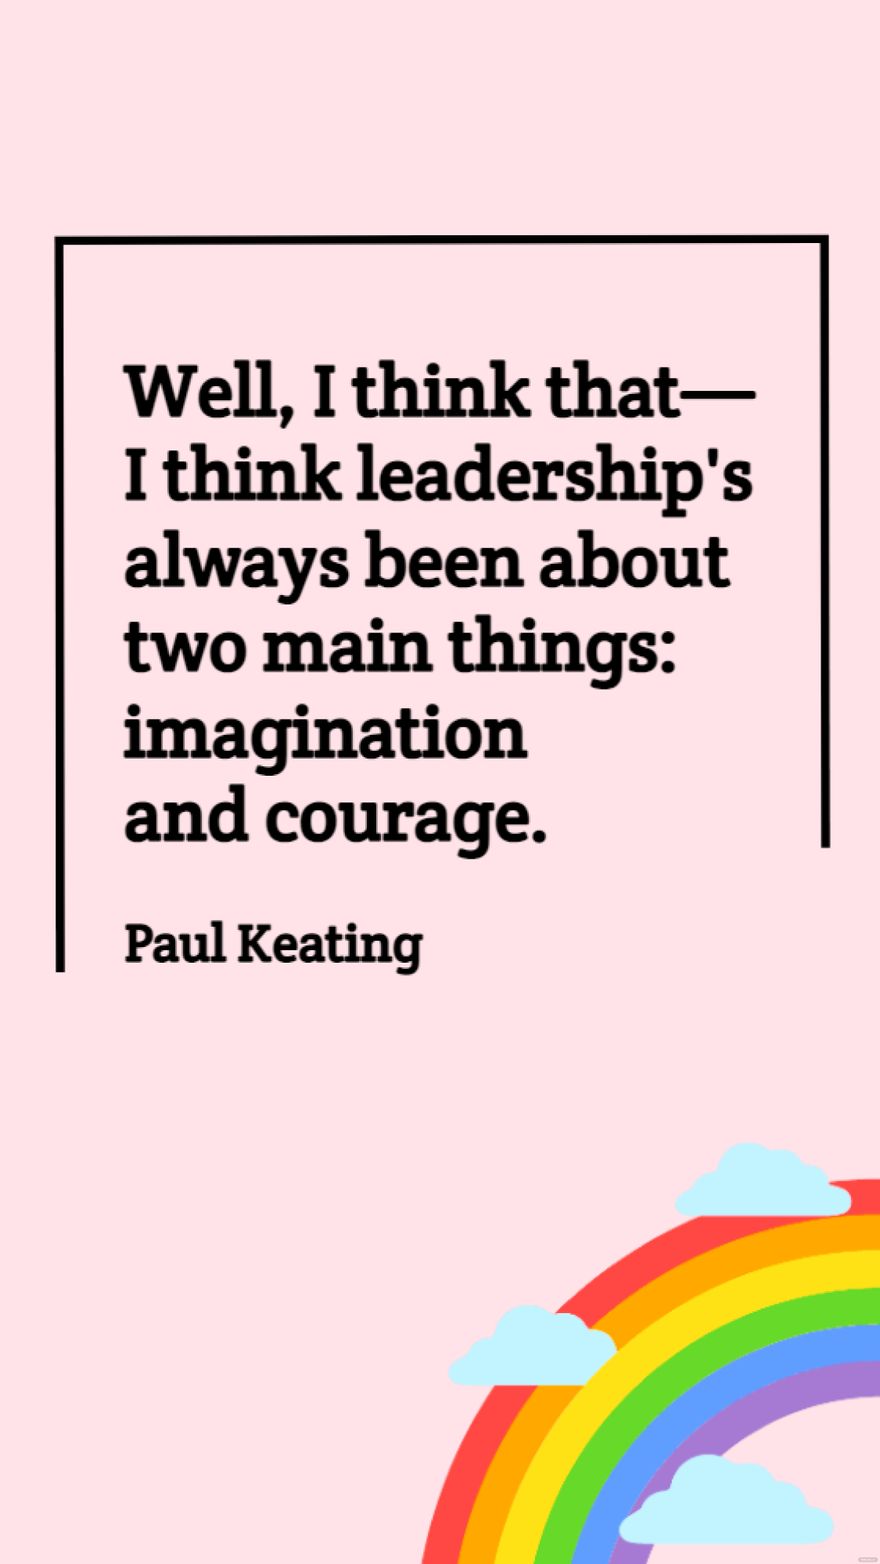 Paul Keating - Well, I think that - I think leadership's always been about two main things: imagination and courage.